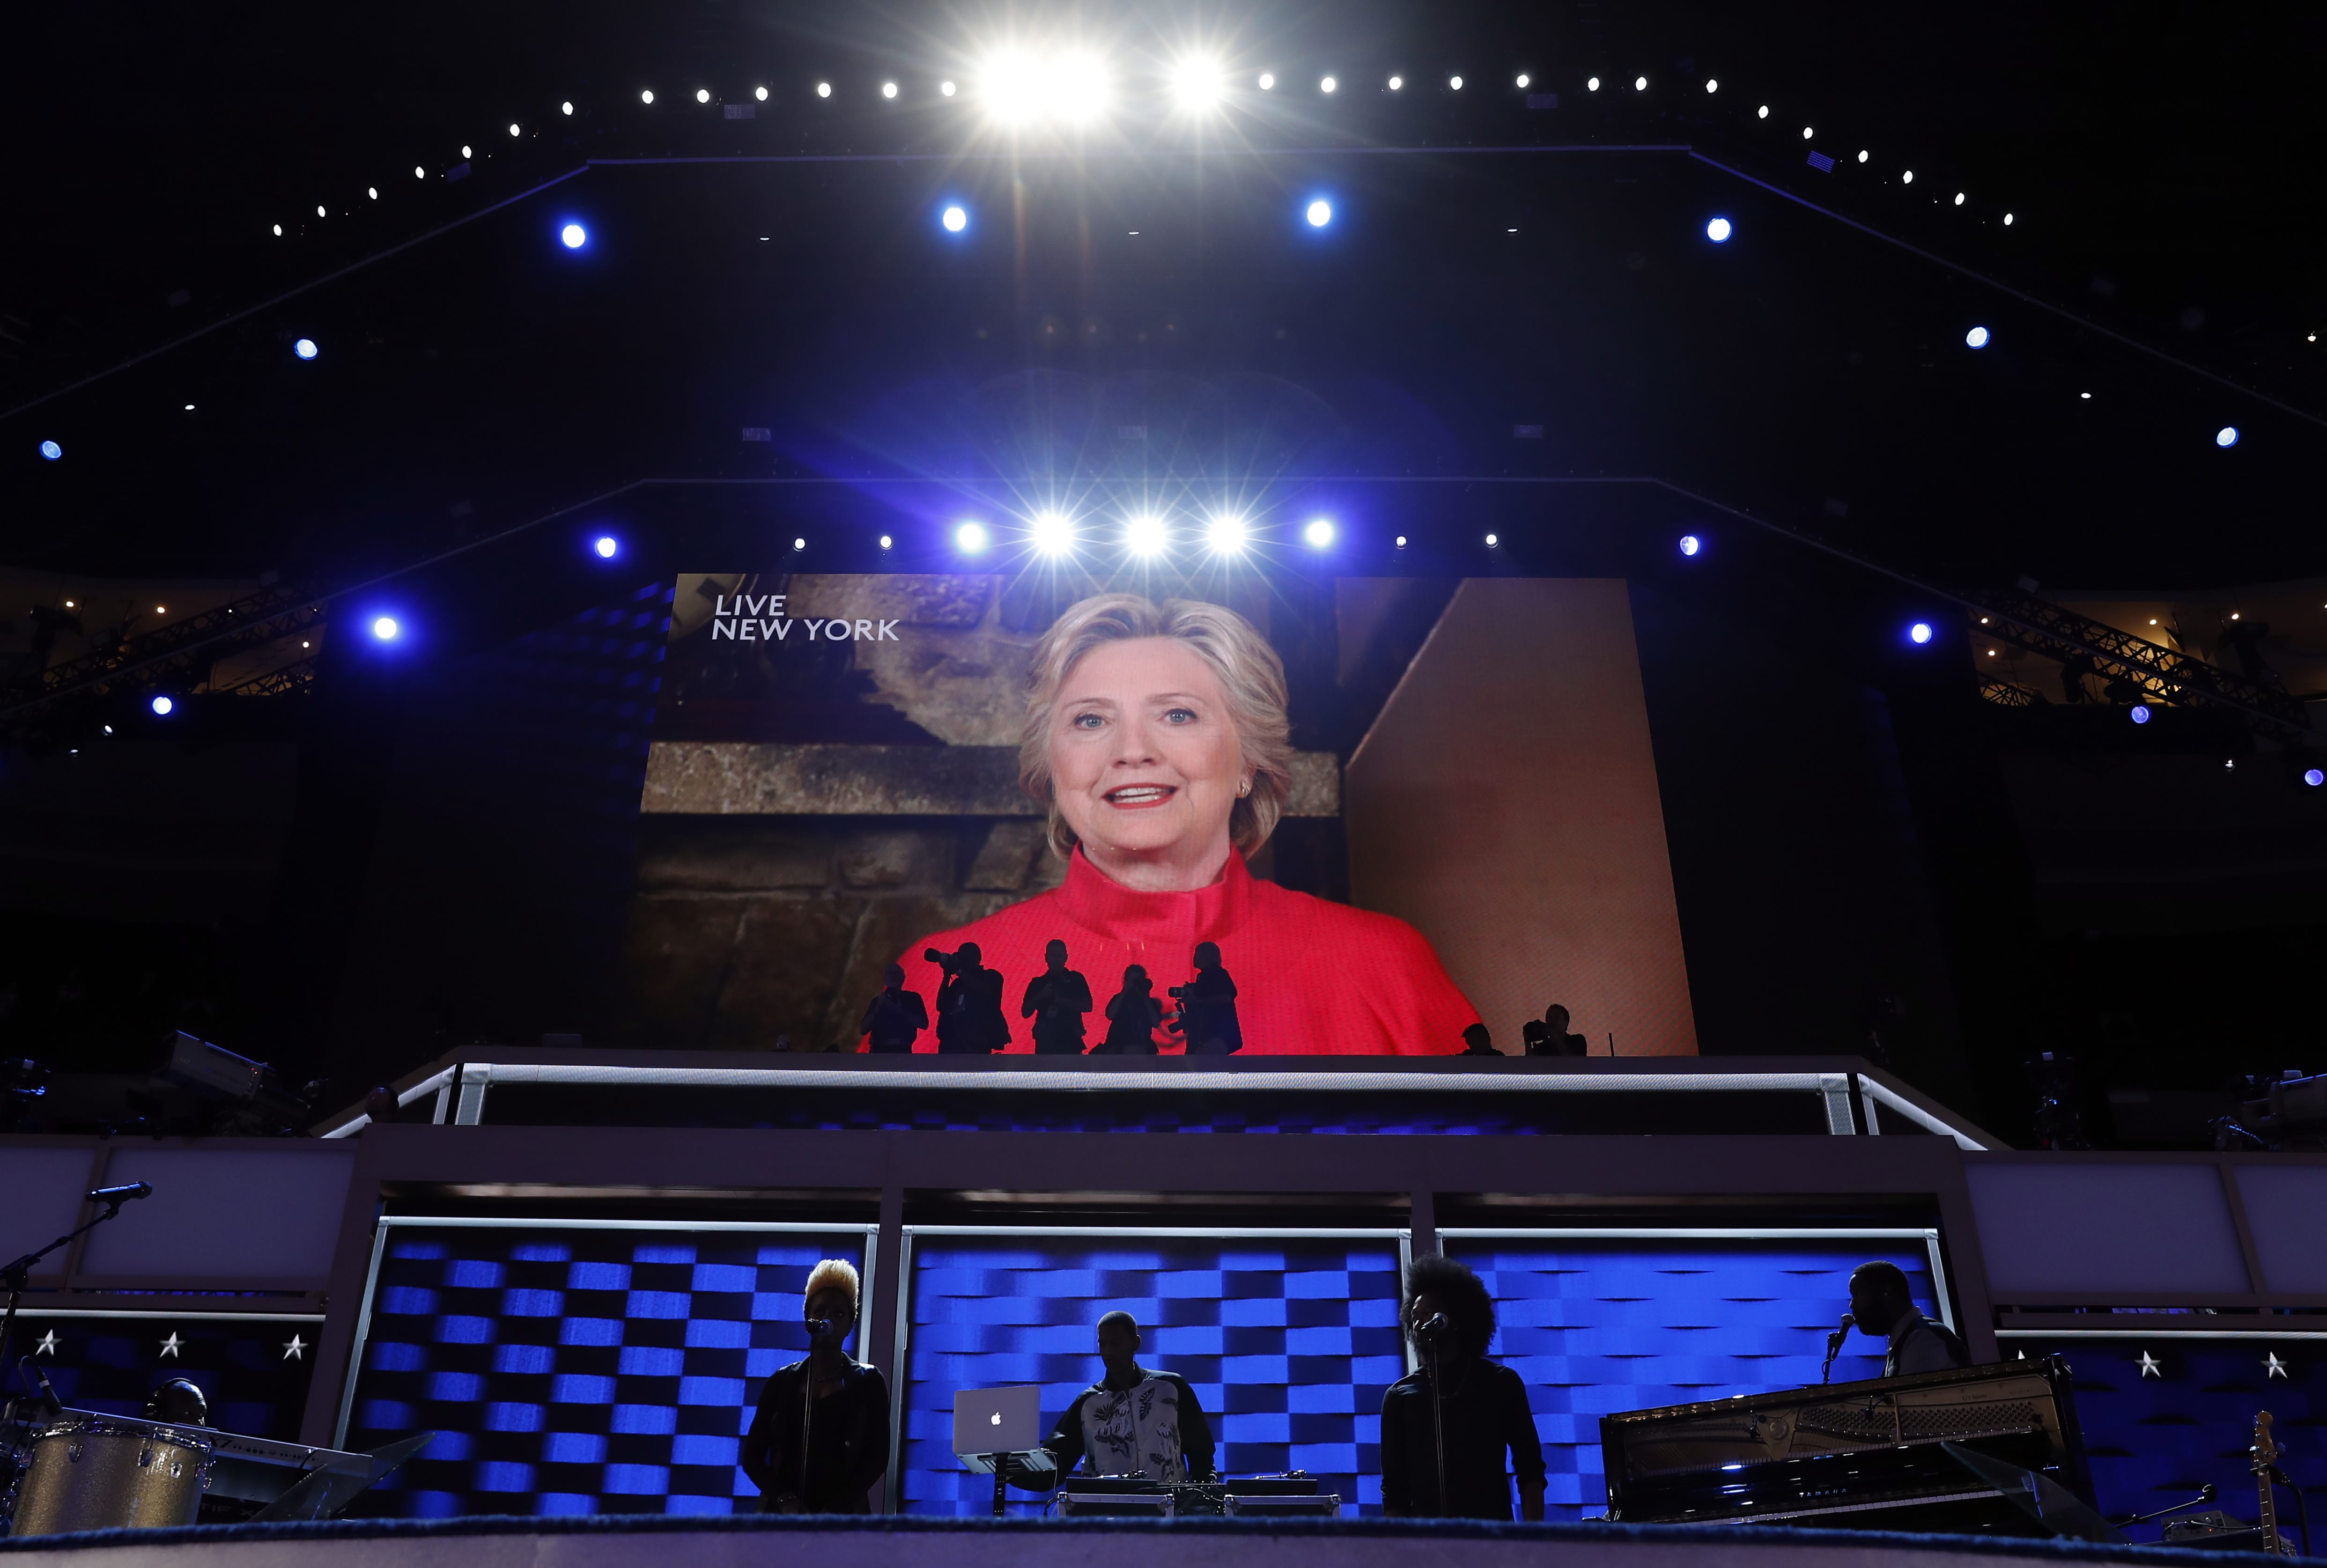 Democratic Presidential candidate Hillary Clinton appears on the screen during the second day session of the Democratic National Convention in Philadelphia, Tuesday, July 26, 2016.